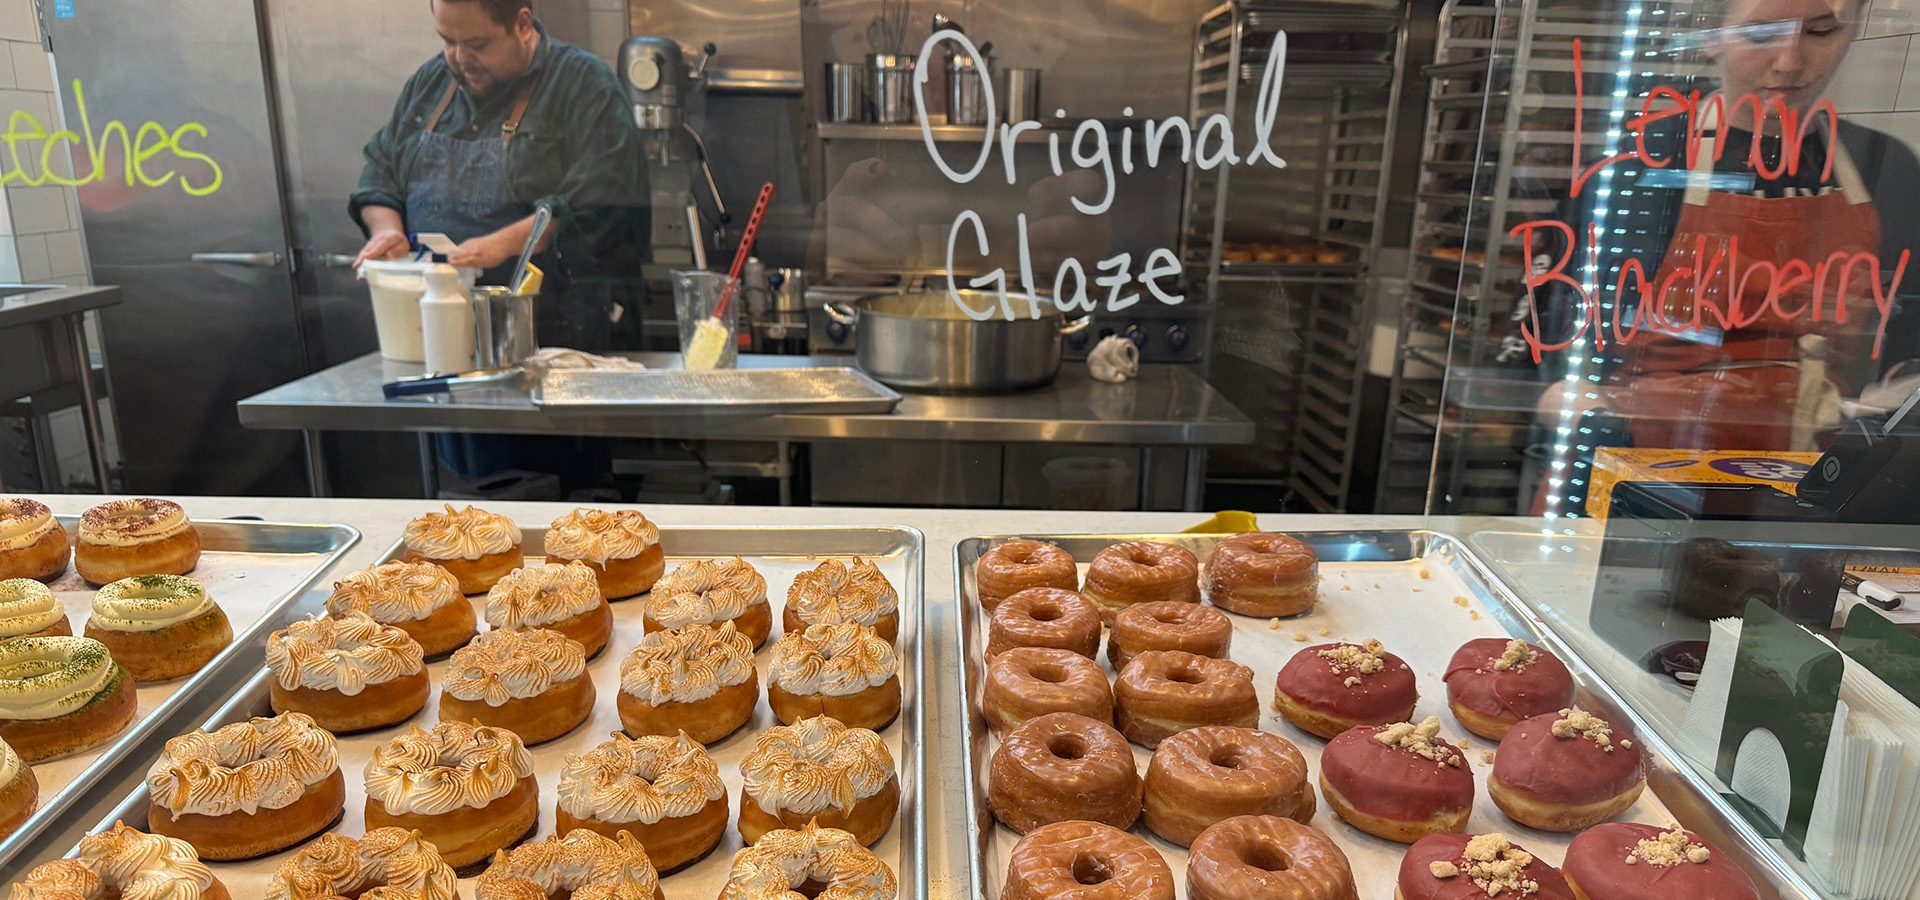 donuts with kitchen behind